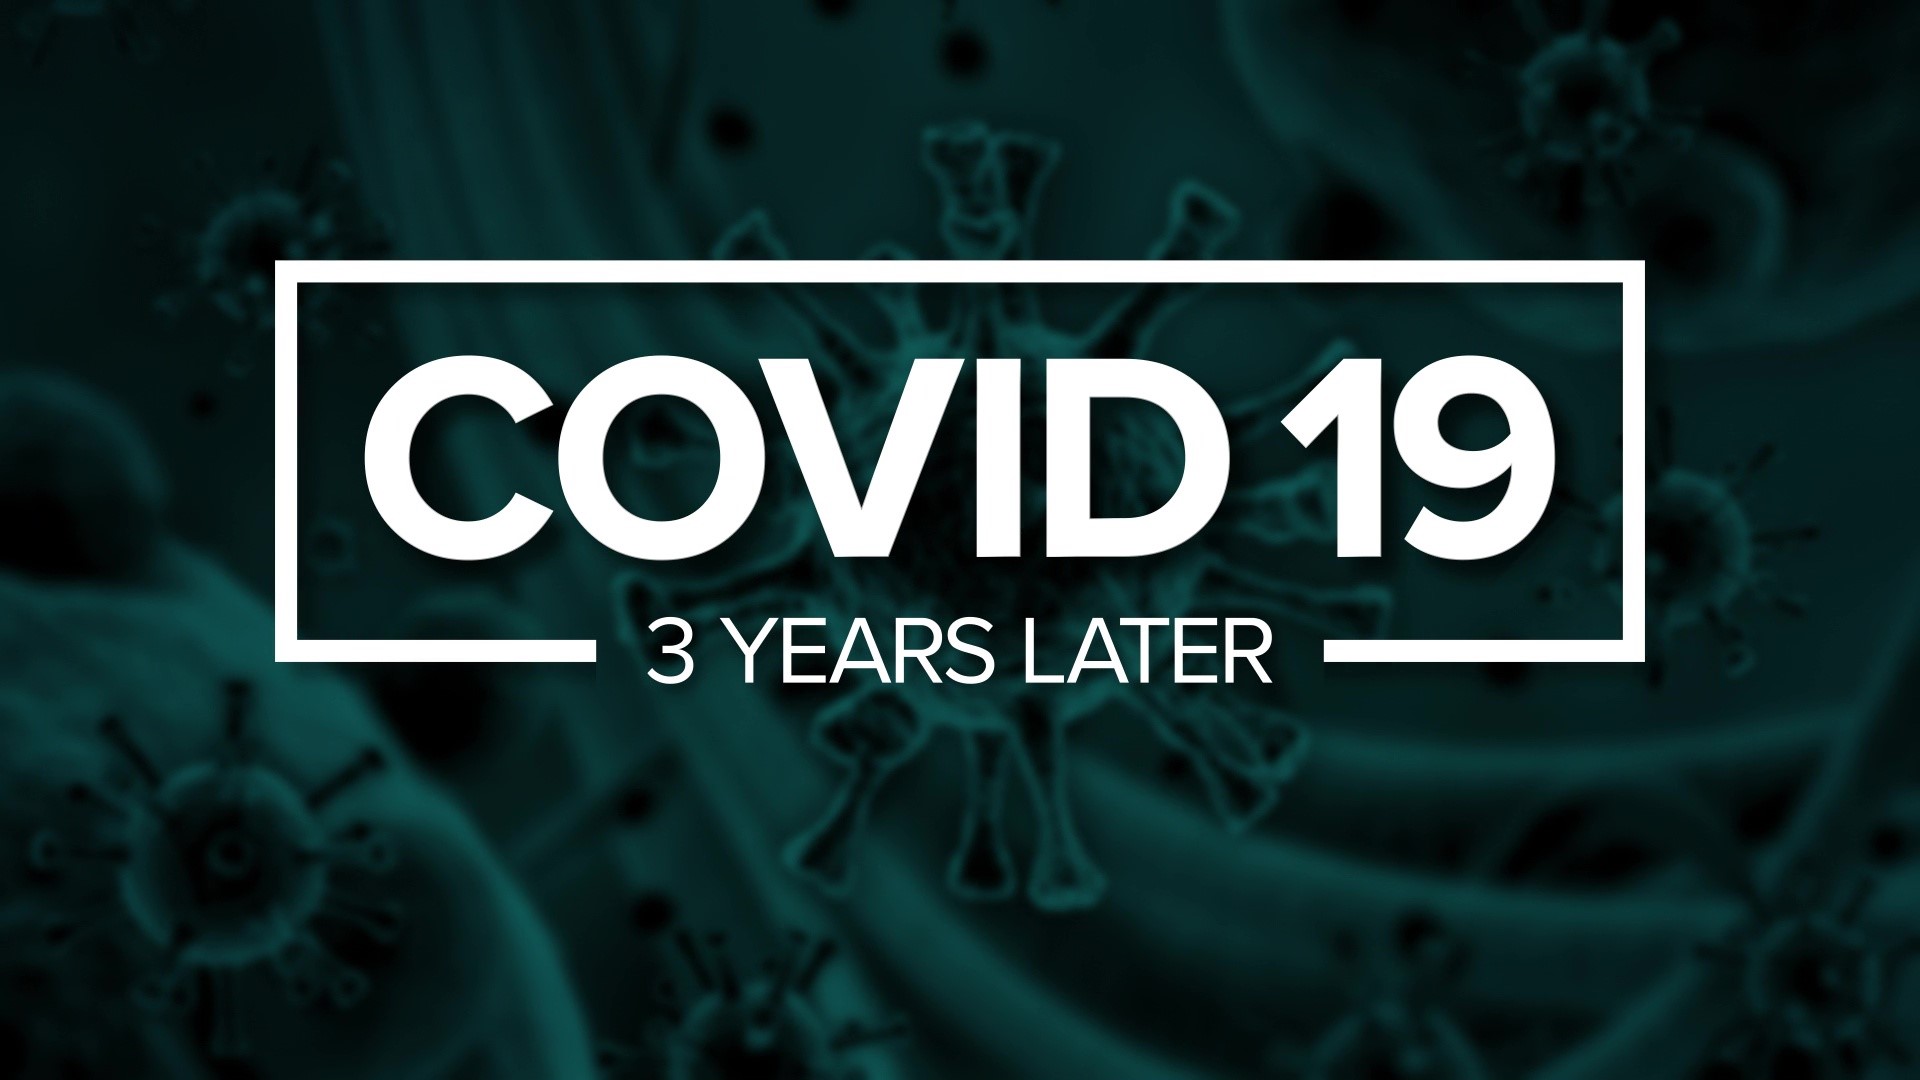 It's been three years since the world shut down due to COVID-19, and doctors are still seeing patients dealing with long-term symptoms.